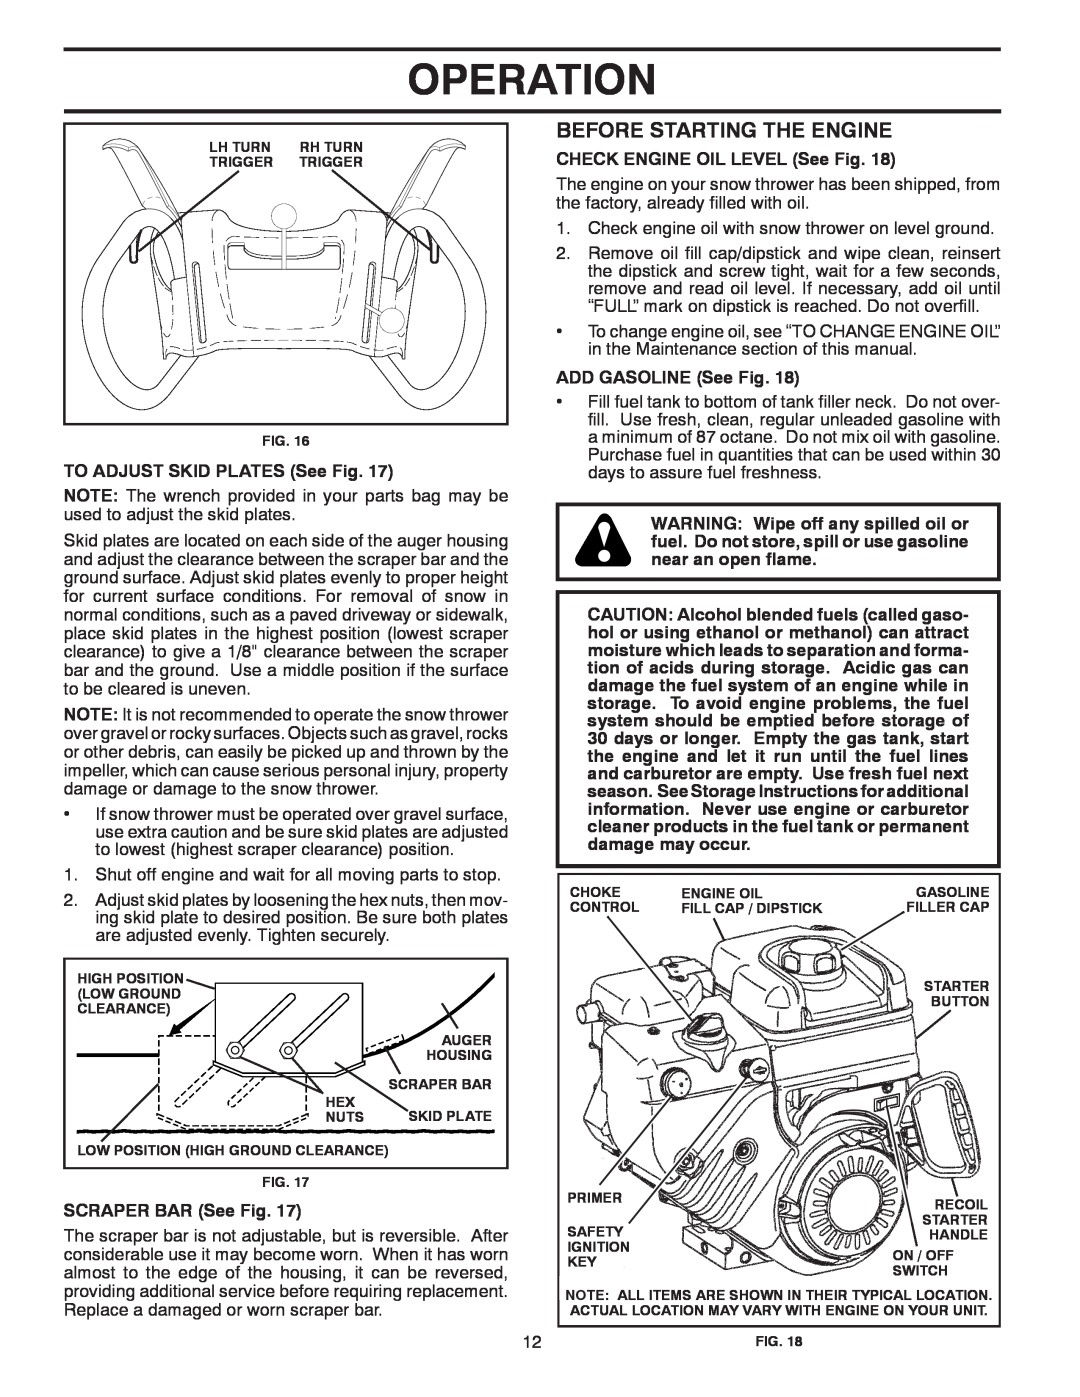 Poulan 429264, 96198003301 Before Starting The Engine, Operation, TO ADJUST SKID PLATES See Fig, SCRAPER BAR See Fig 